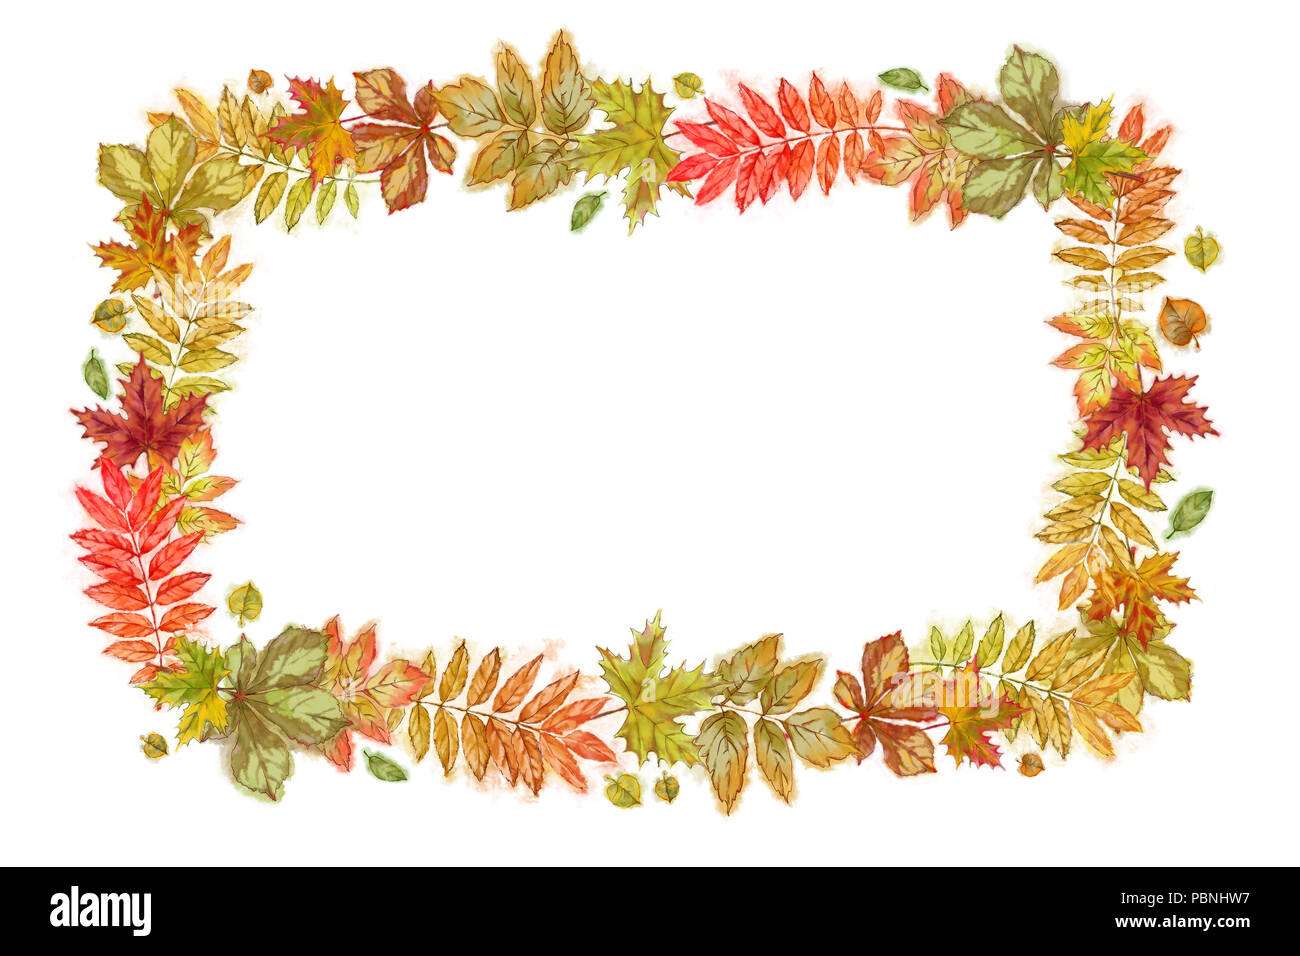 Autumn Leaves Rectangular Frame Isolated on White. Watercolor Autumnal Design for Print, Cards, Announcement, Invitation, Menu etc. Stock Photo